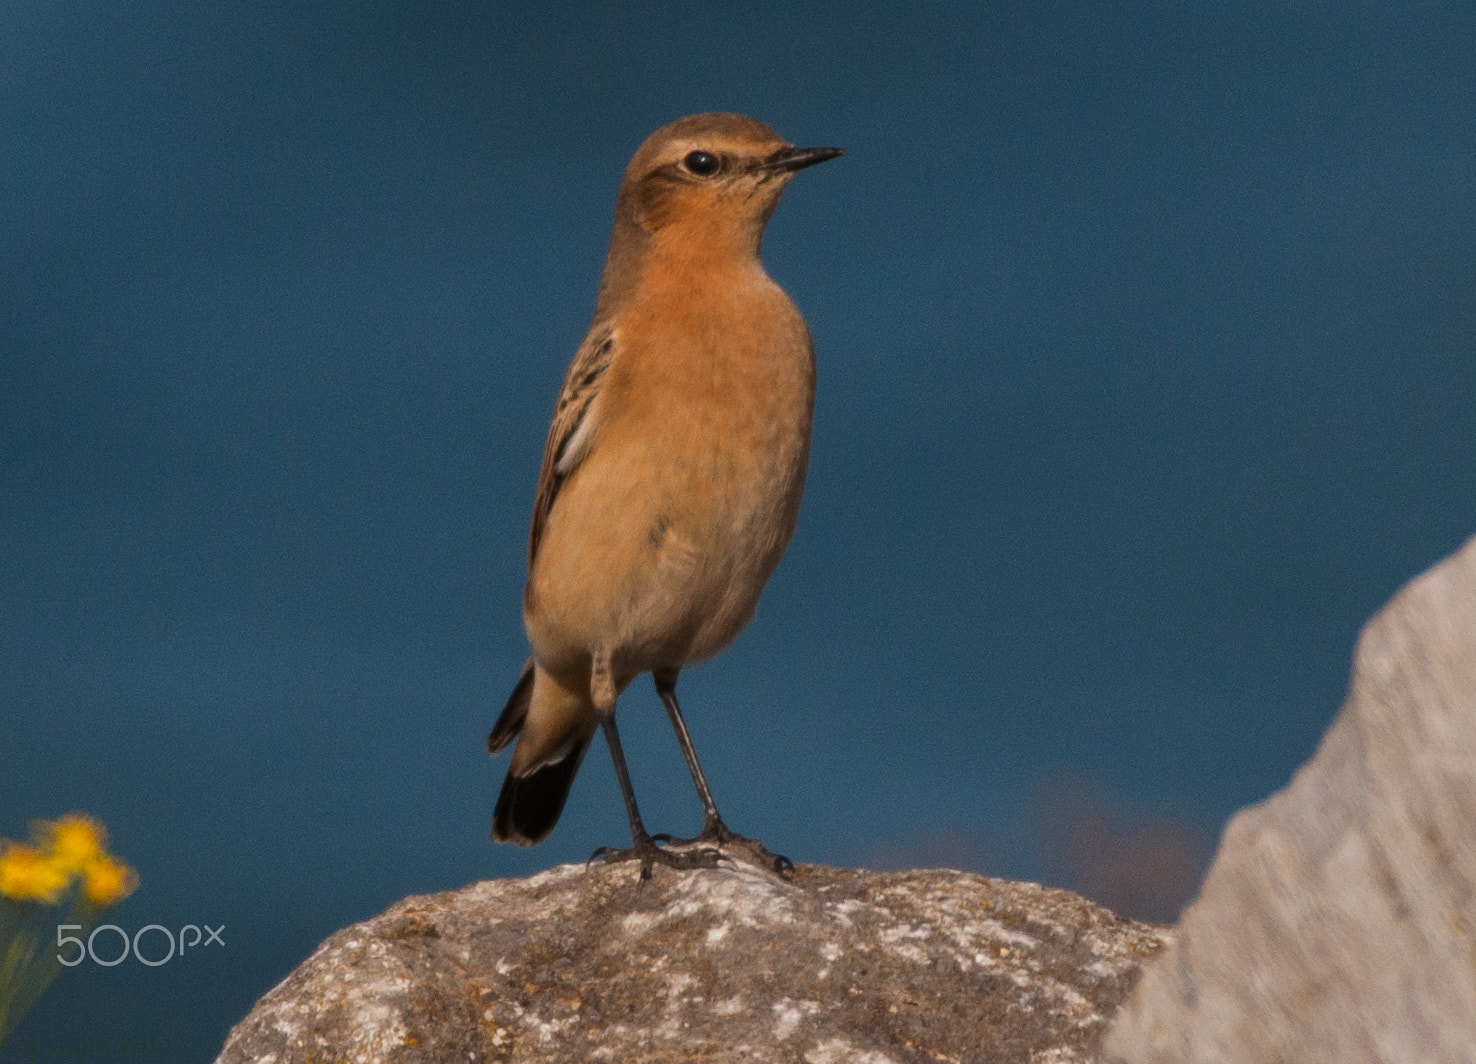 Nikon D90 + Sigma 150-600mm F5-6.3 DG OS HSM | C sample photo. Northern wheatear / tapuit photography